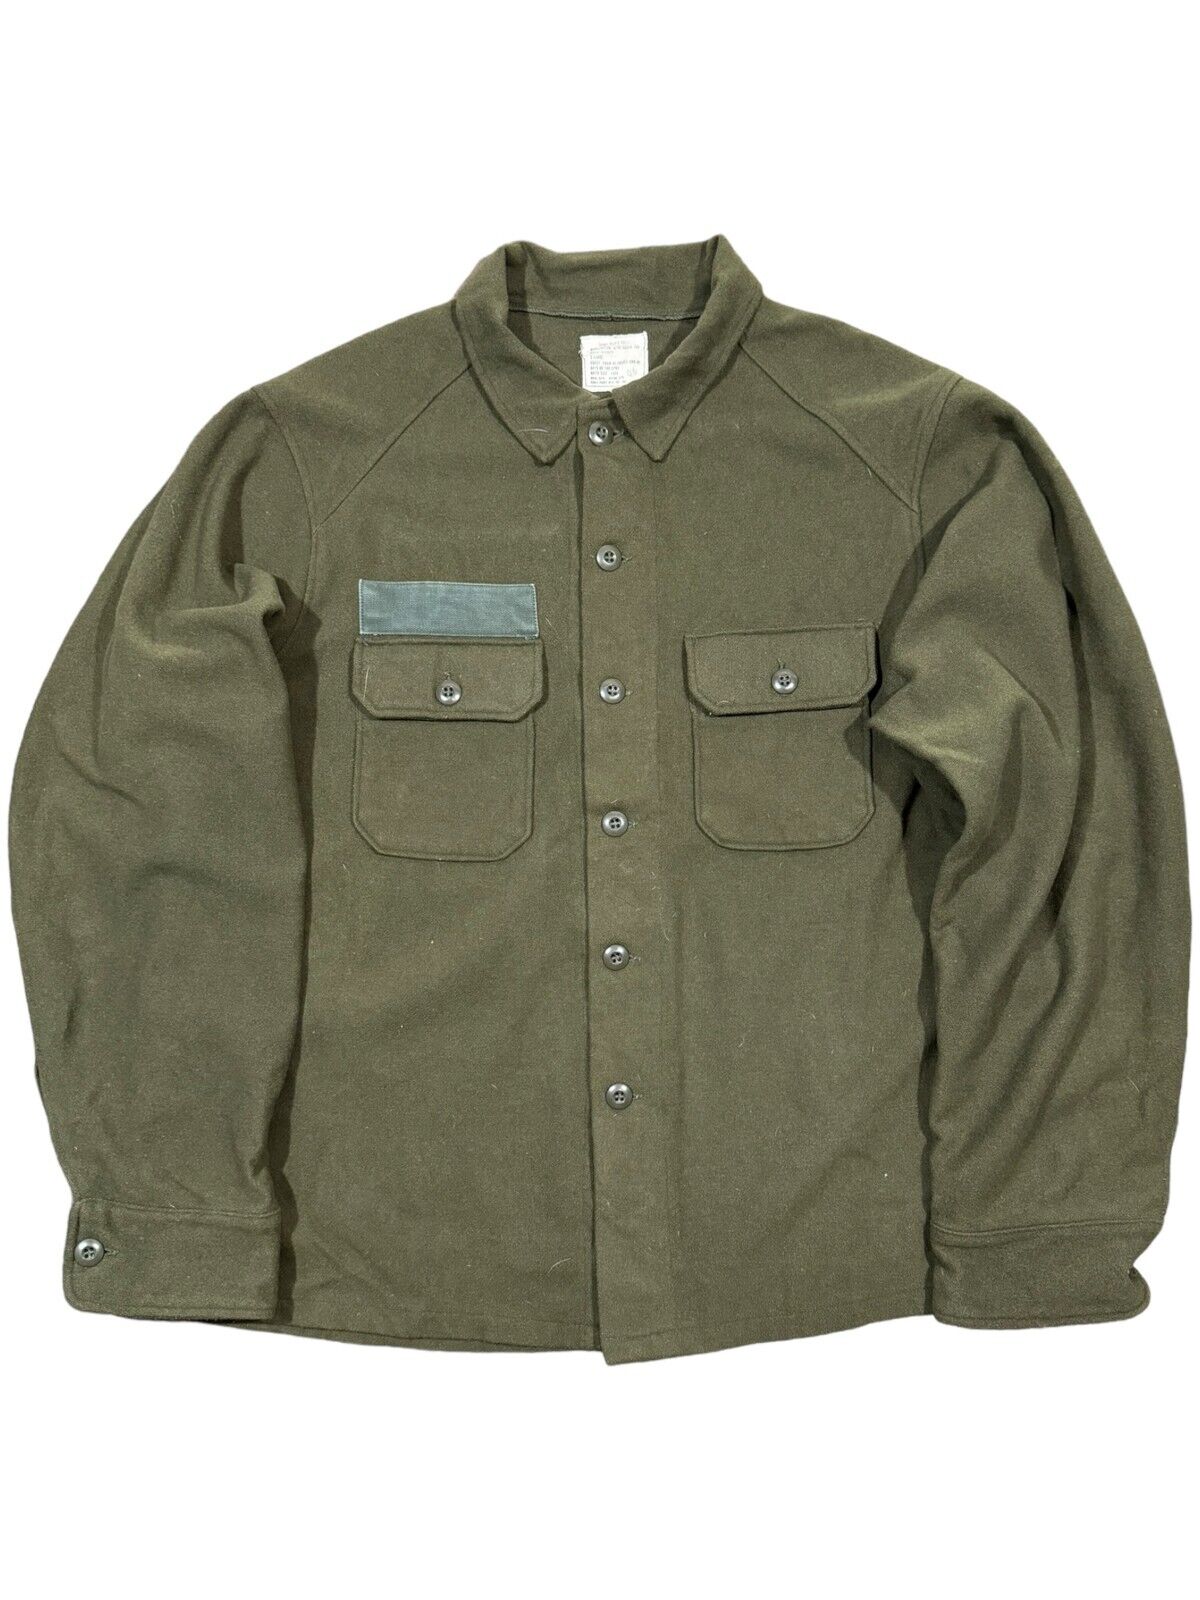 Vintage 1970s U.S. MILITARY OG-108 COLD WEATHER WOOL Nylon FIELD SHIRT SIZE XL